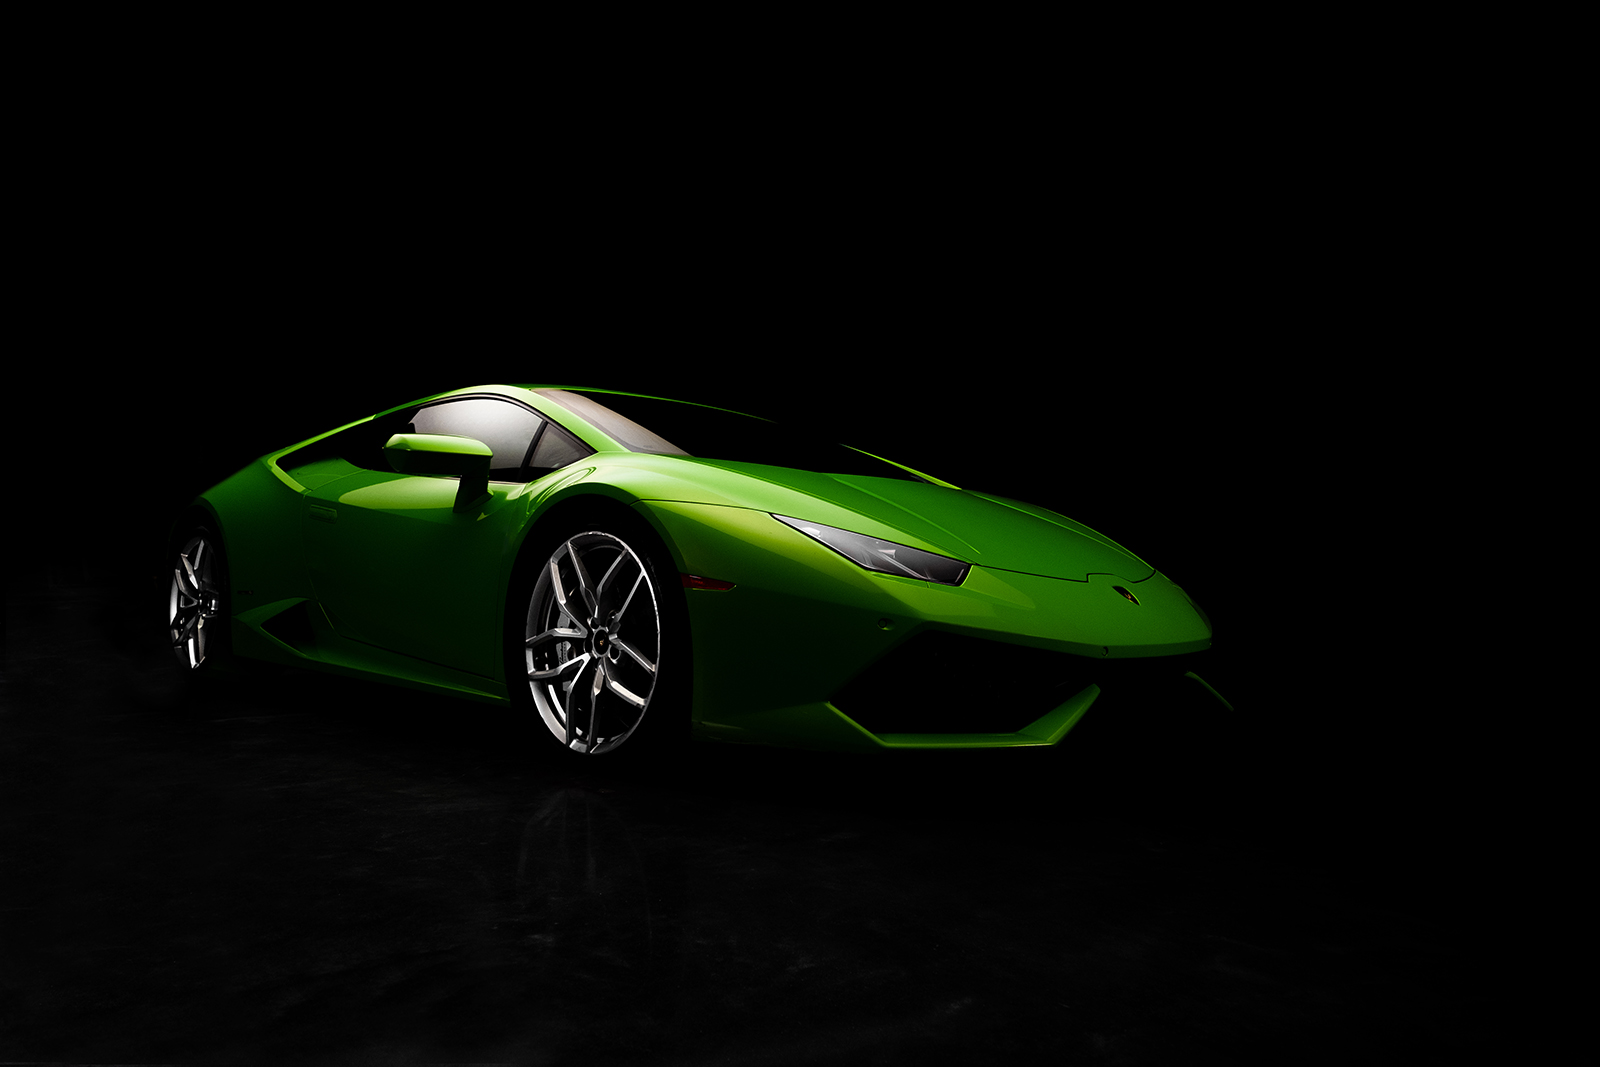 A three-quarter view of the front of a lime green Lamborghini Huracan in dramatic lighting